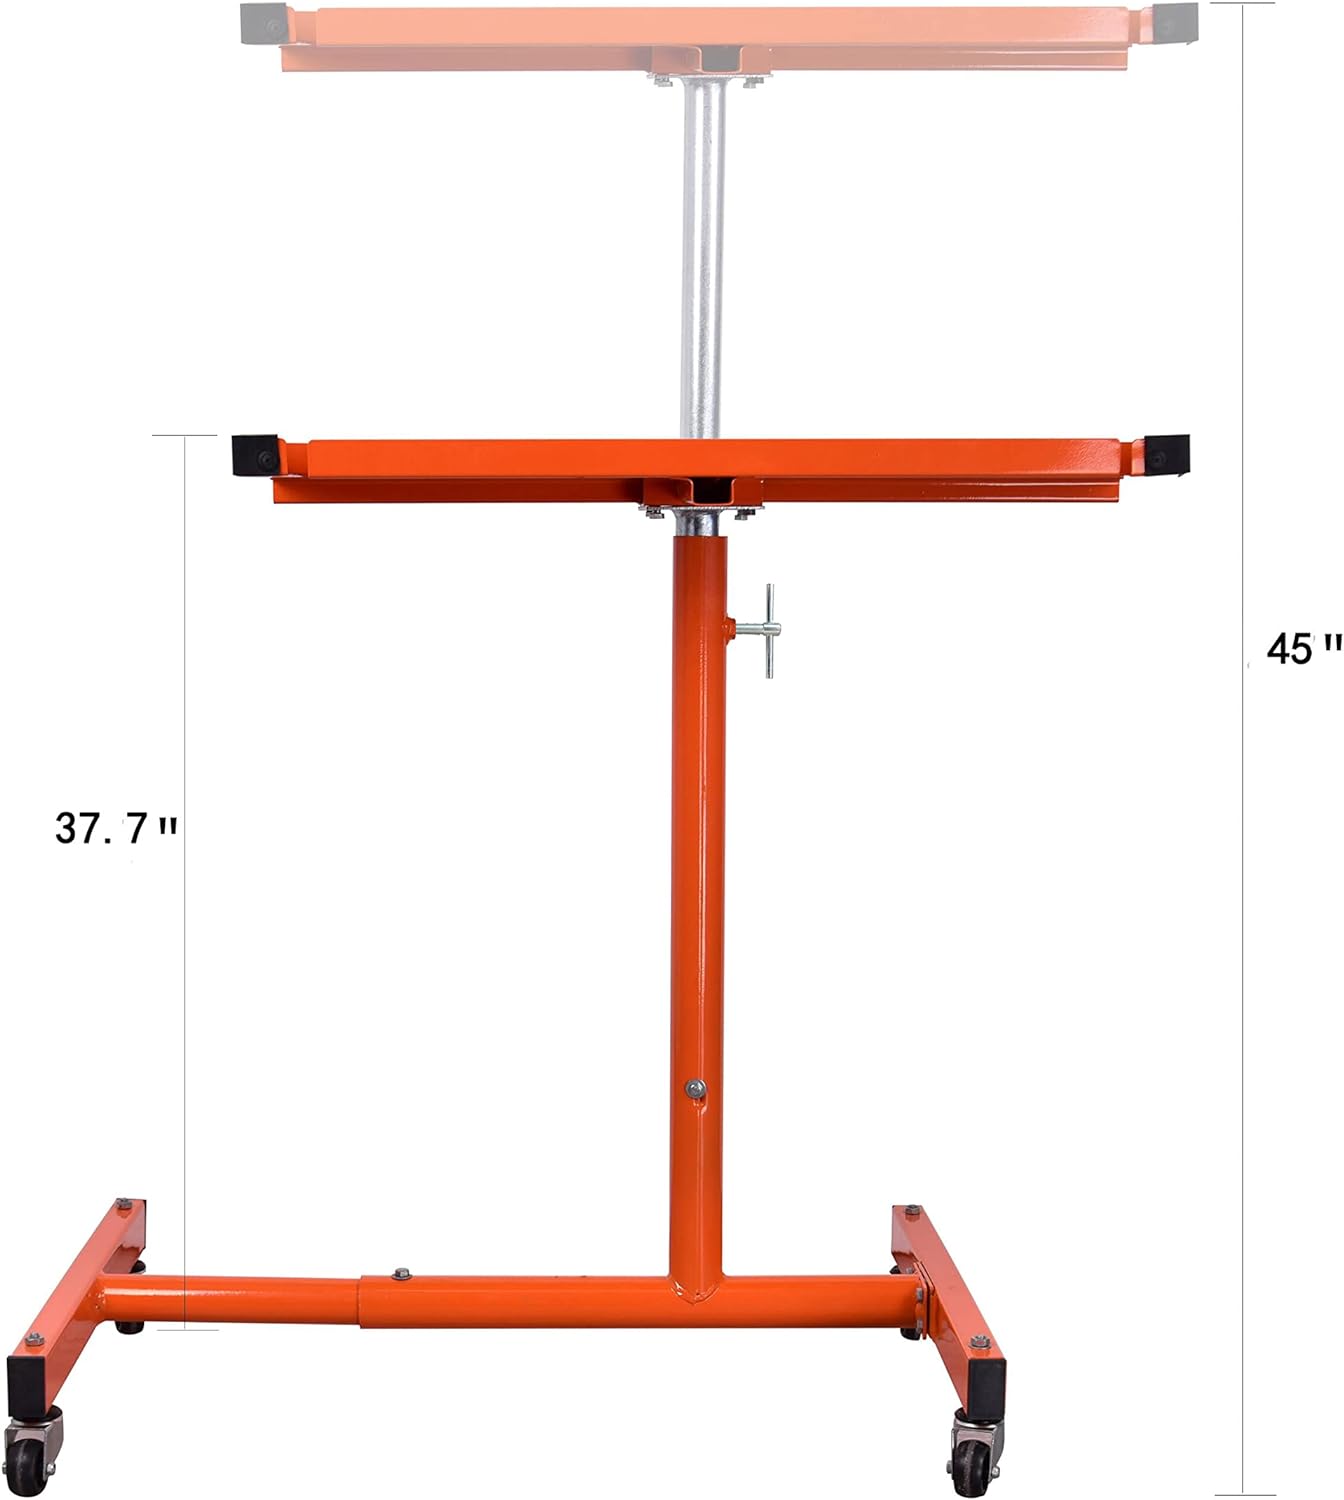 Aain &#194;&#174; L018A Heavy-Duty Adjustable Work Table with Wheels, Mechanic Tray,Mobile Rolling Tool Table, Orange